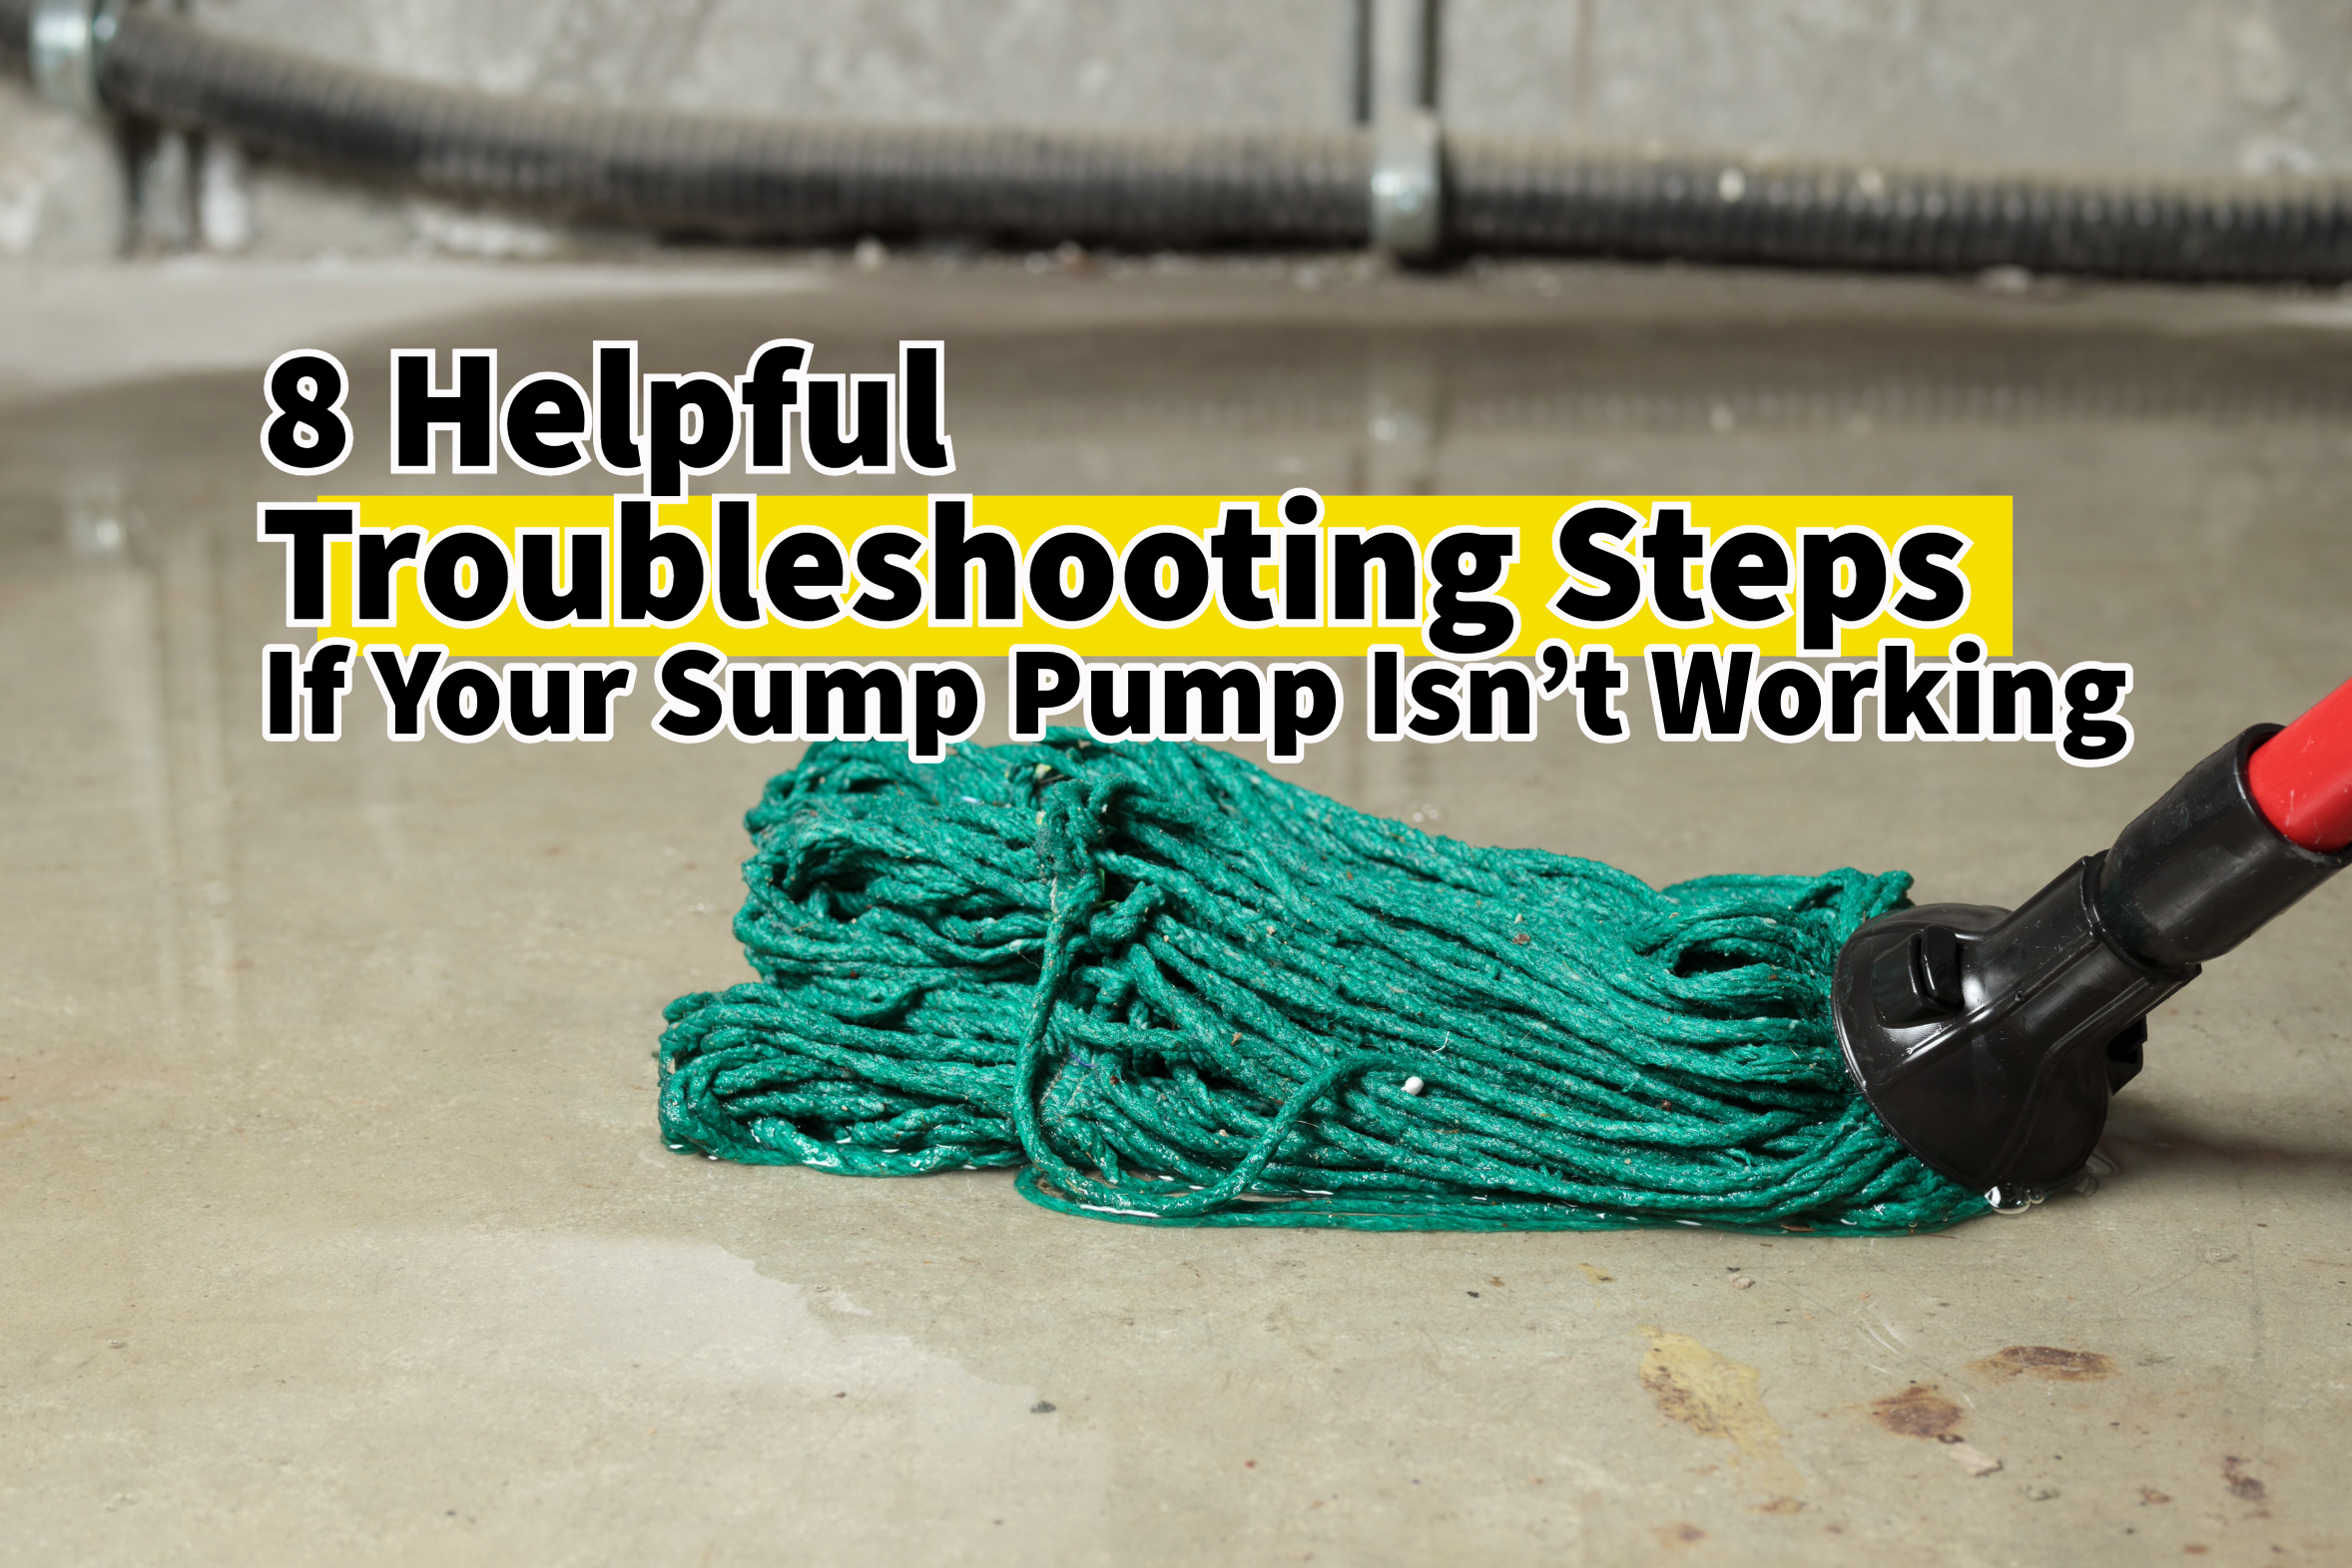 A homeowner’s guide to troubleshooting a malfunctioning sump pump. Plumbing and drain services in Mason, Ohio.